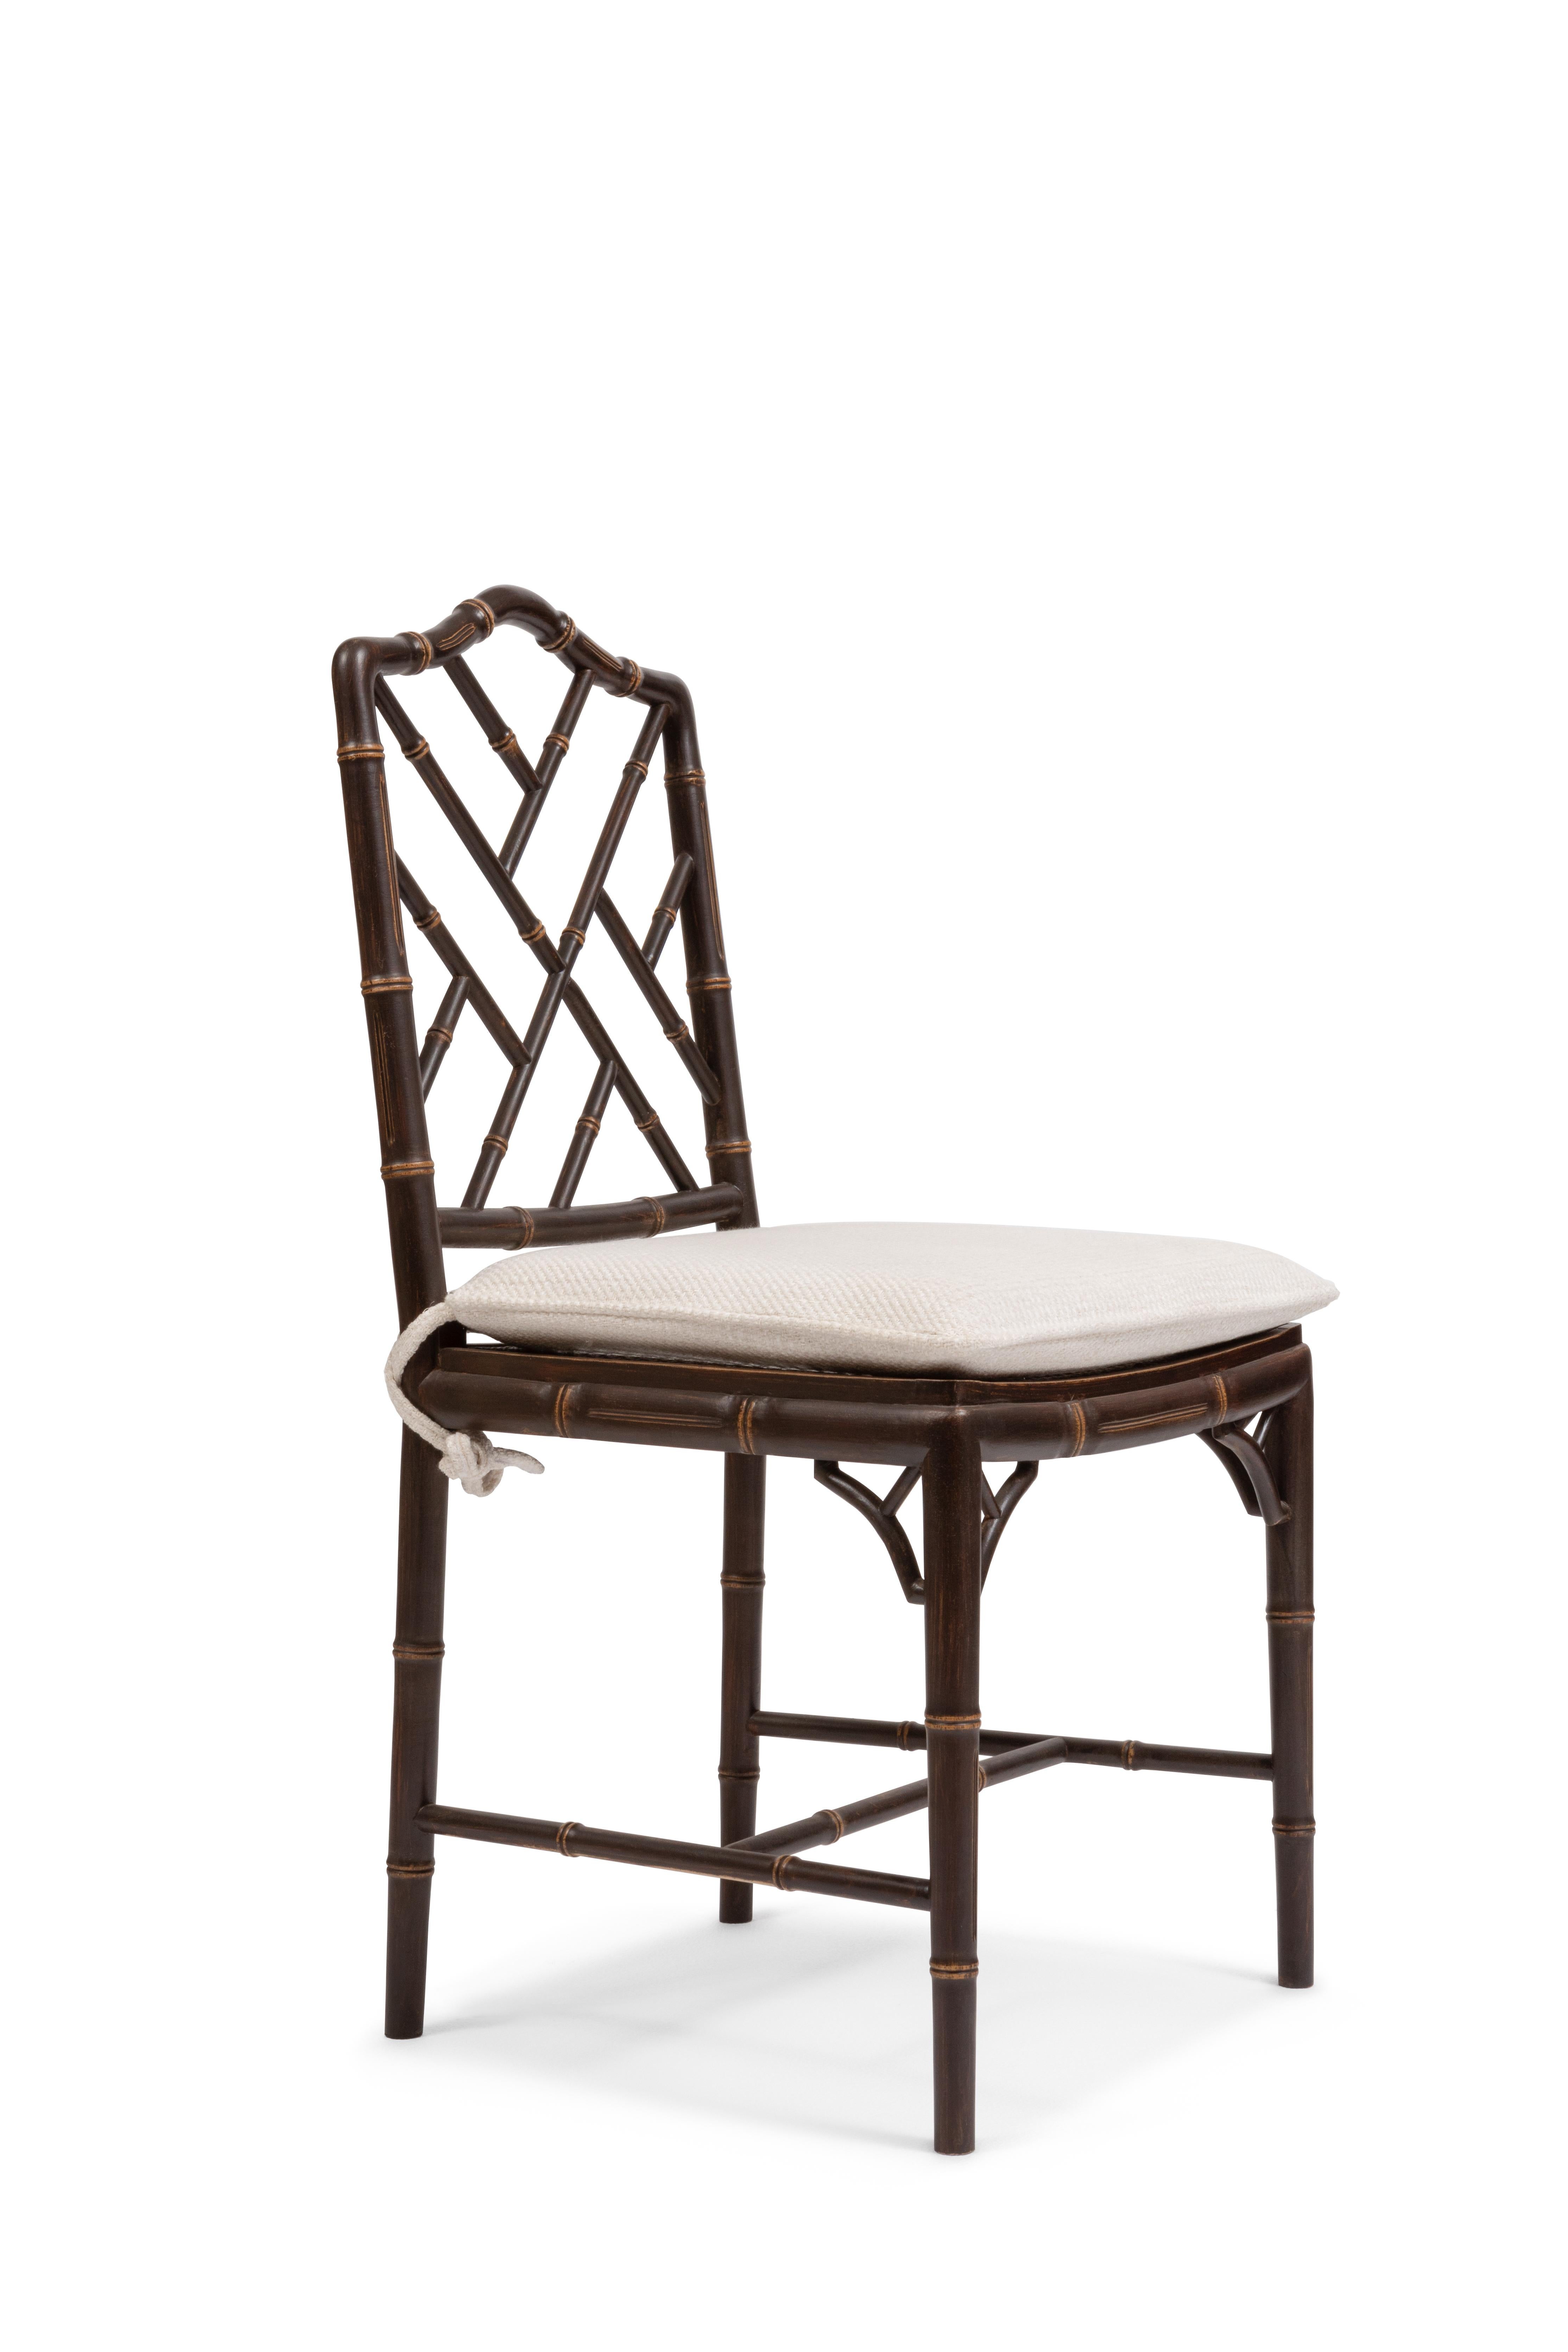 bamboo chippendale chairs